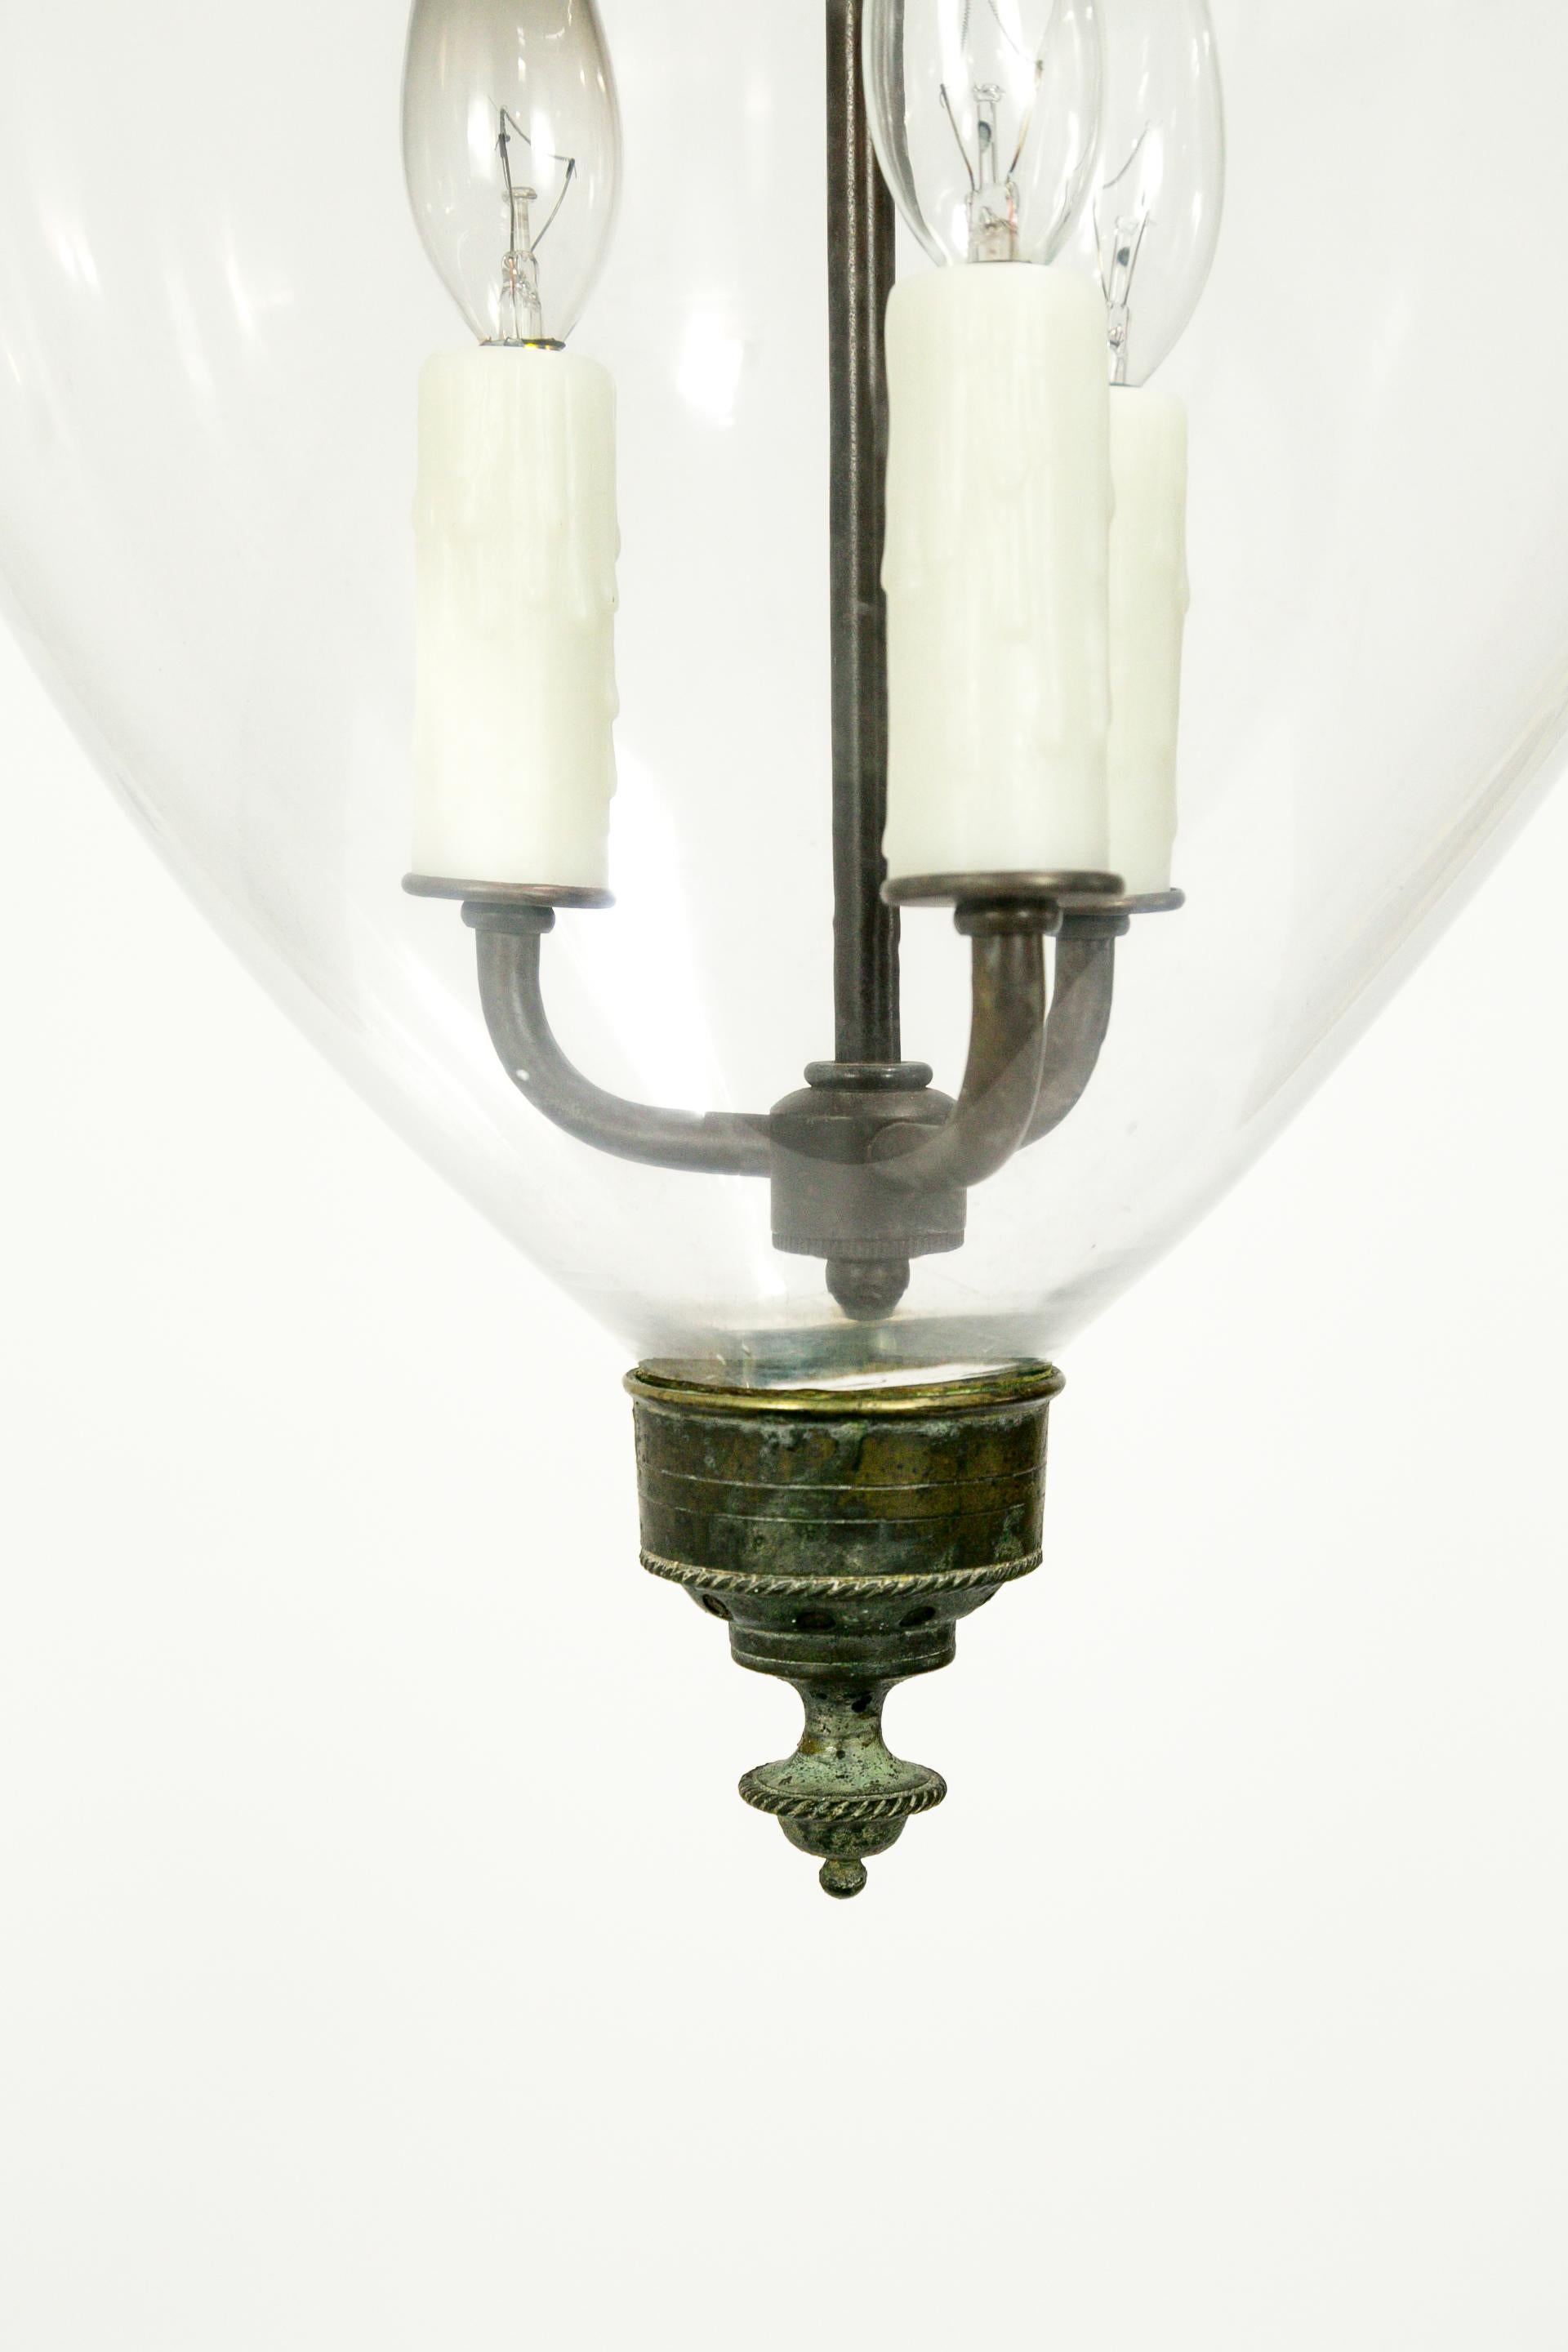 An elegant English bell jar lantern with refined details on the brass hardware: a ribbed glass holder with bird head chain hooks, and a rope-trimmed finial. The brass has a beautiful, aged patina. Handblown jar and smoke bell. 3-light candelabra